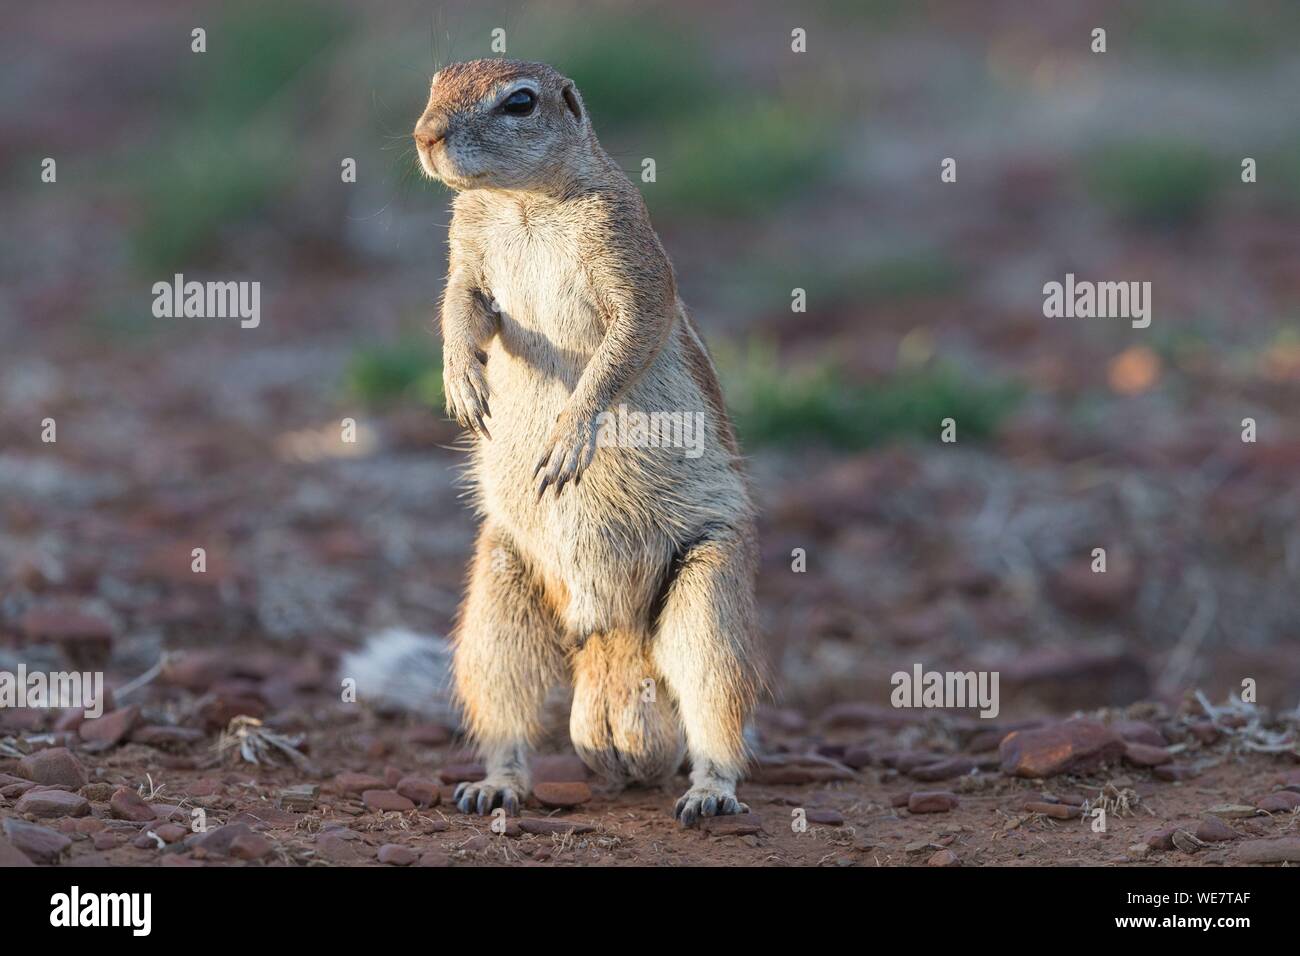 South Africa, Private reserve, Asian (Bengal) Tiger (Panthera tigris tigris), Cape ground squirrel (Xerus inauris) Stock Photo